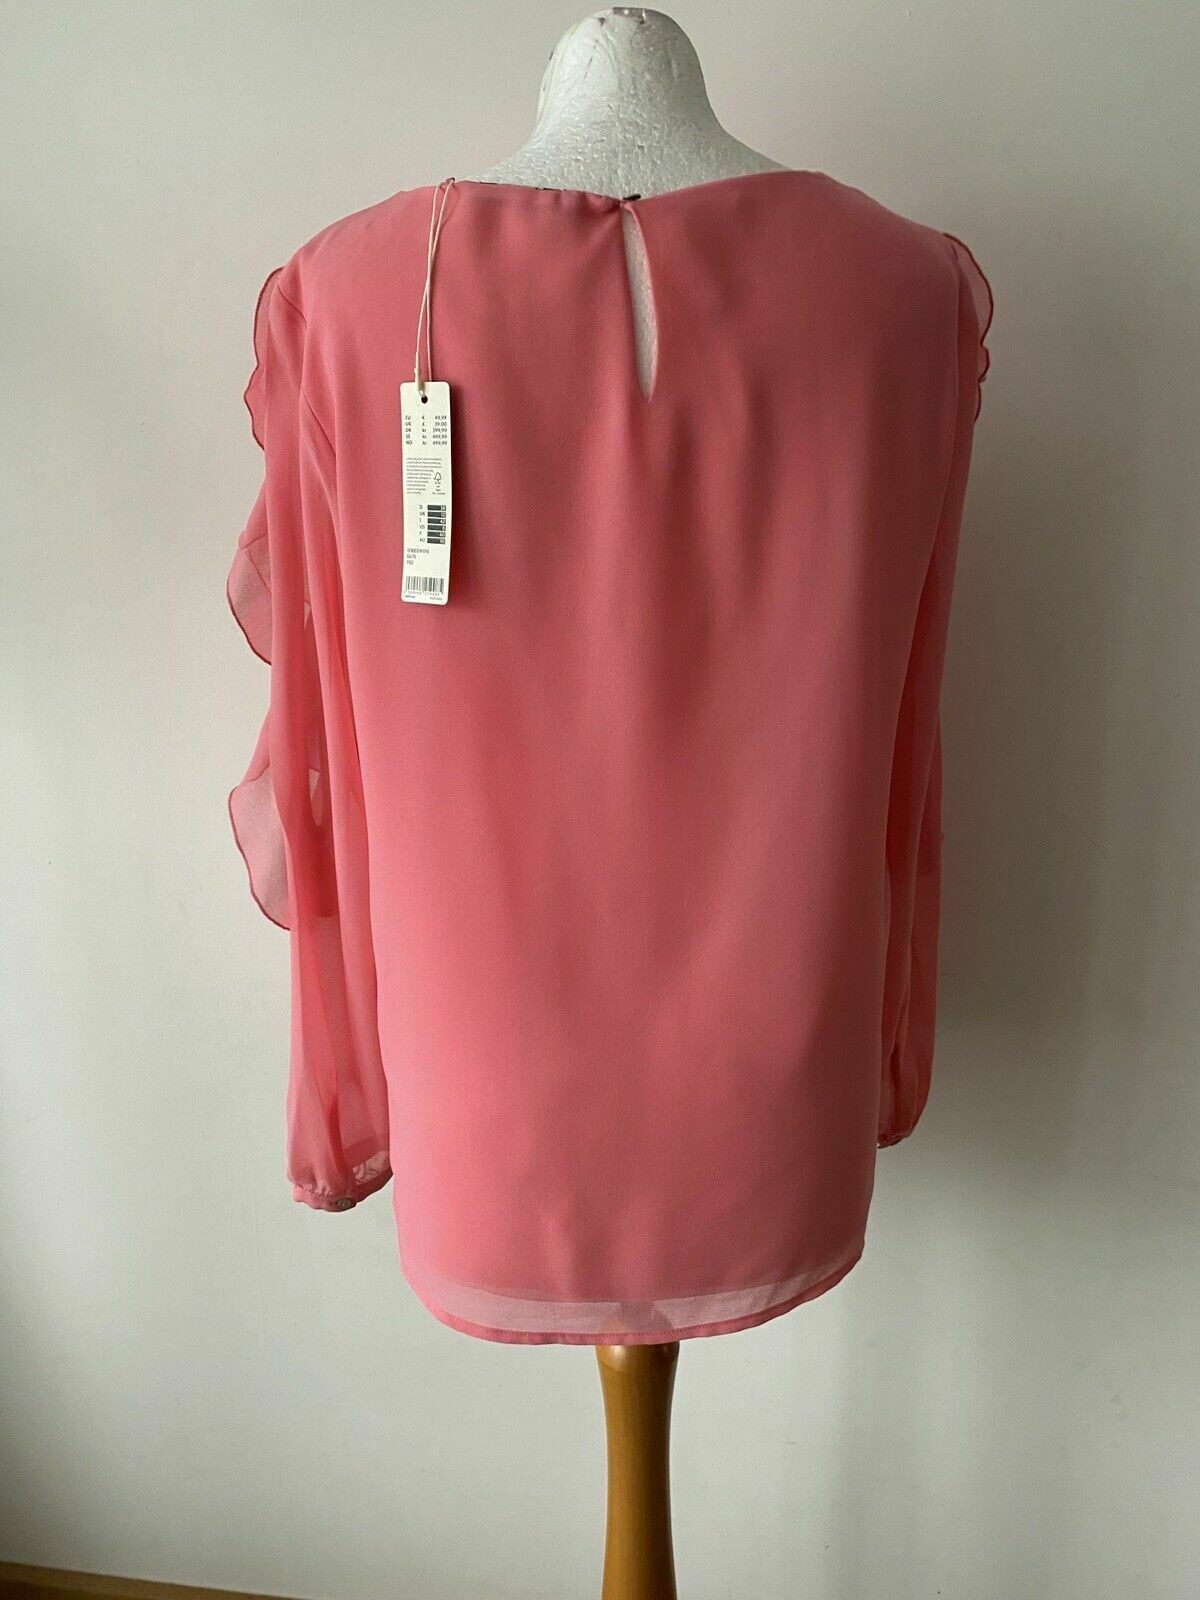 Esprit Pink Blouse Size 12 Ruffle Sleeves